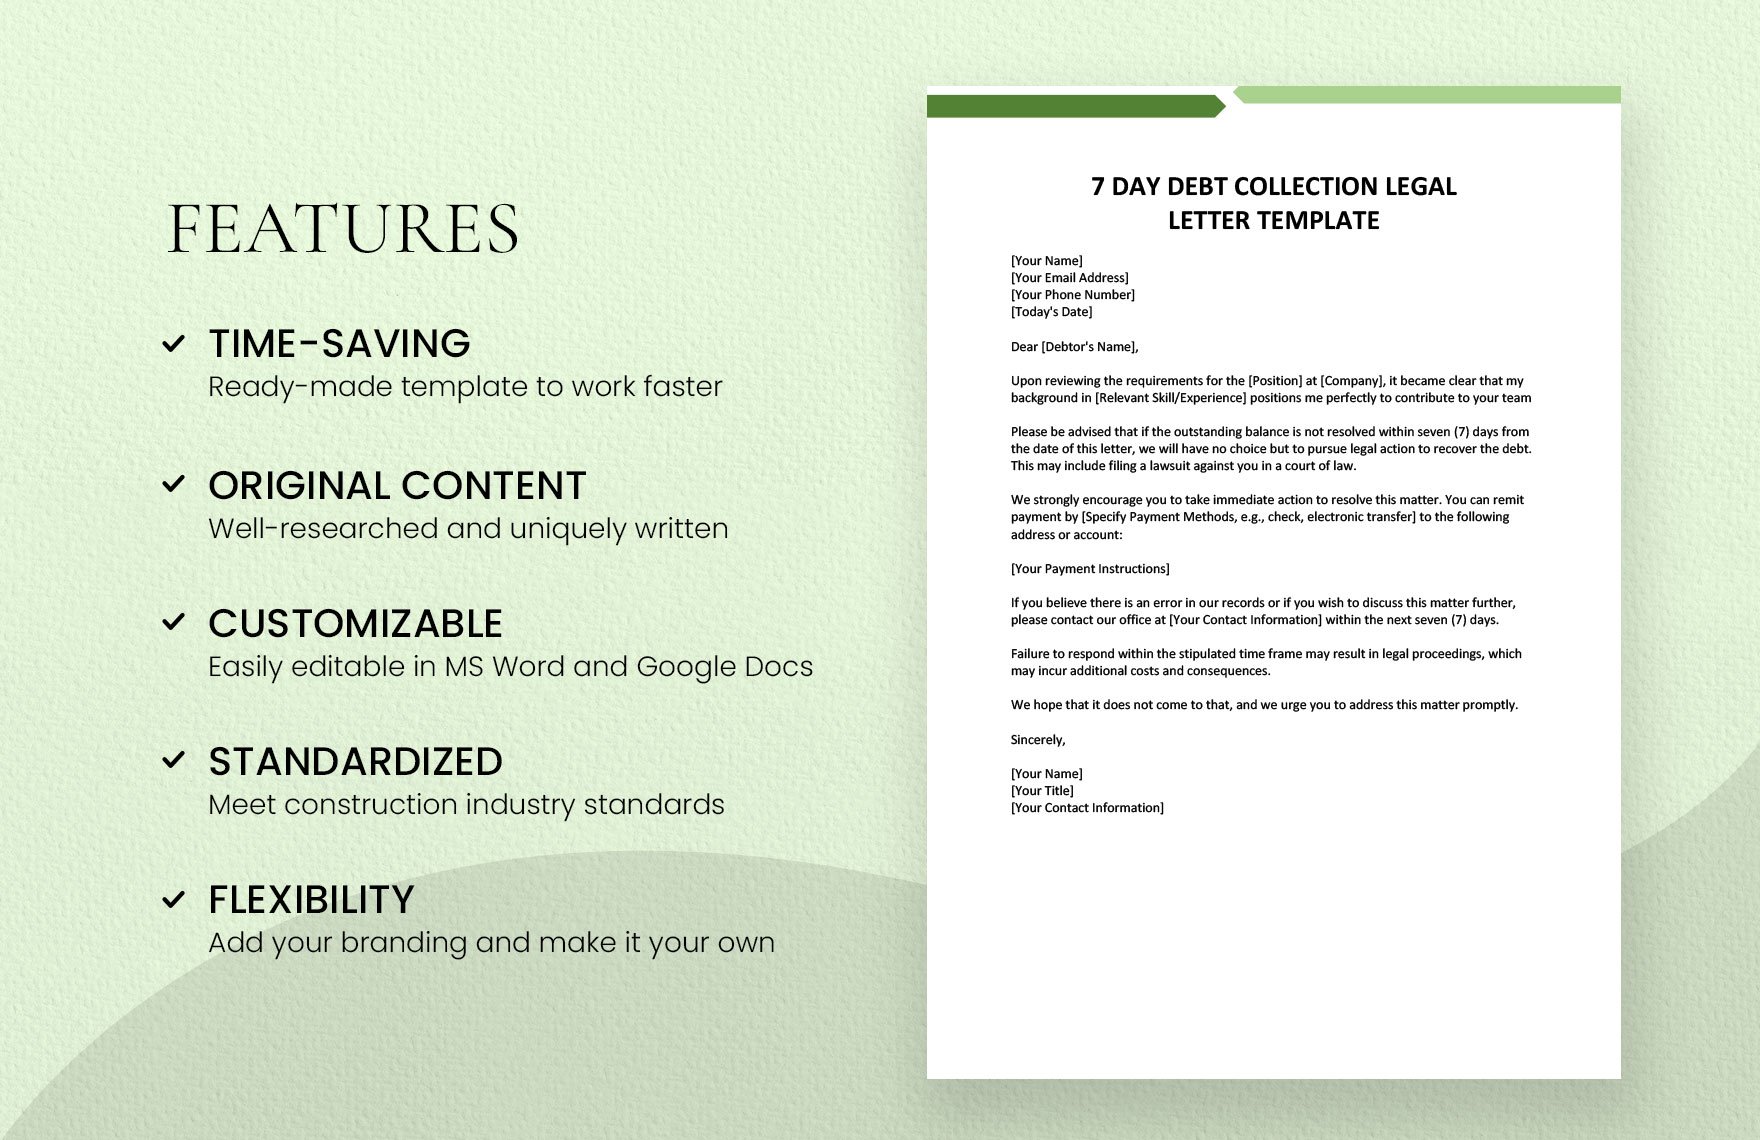 7 Day Debt Collection Legal Letter Template